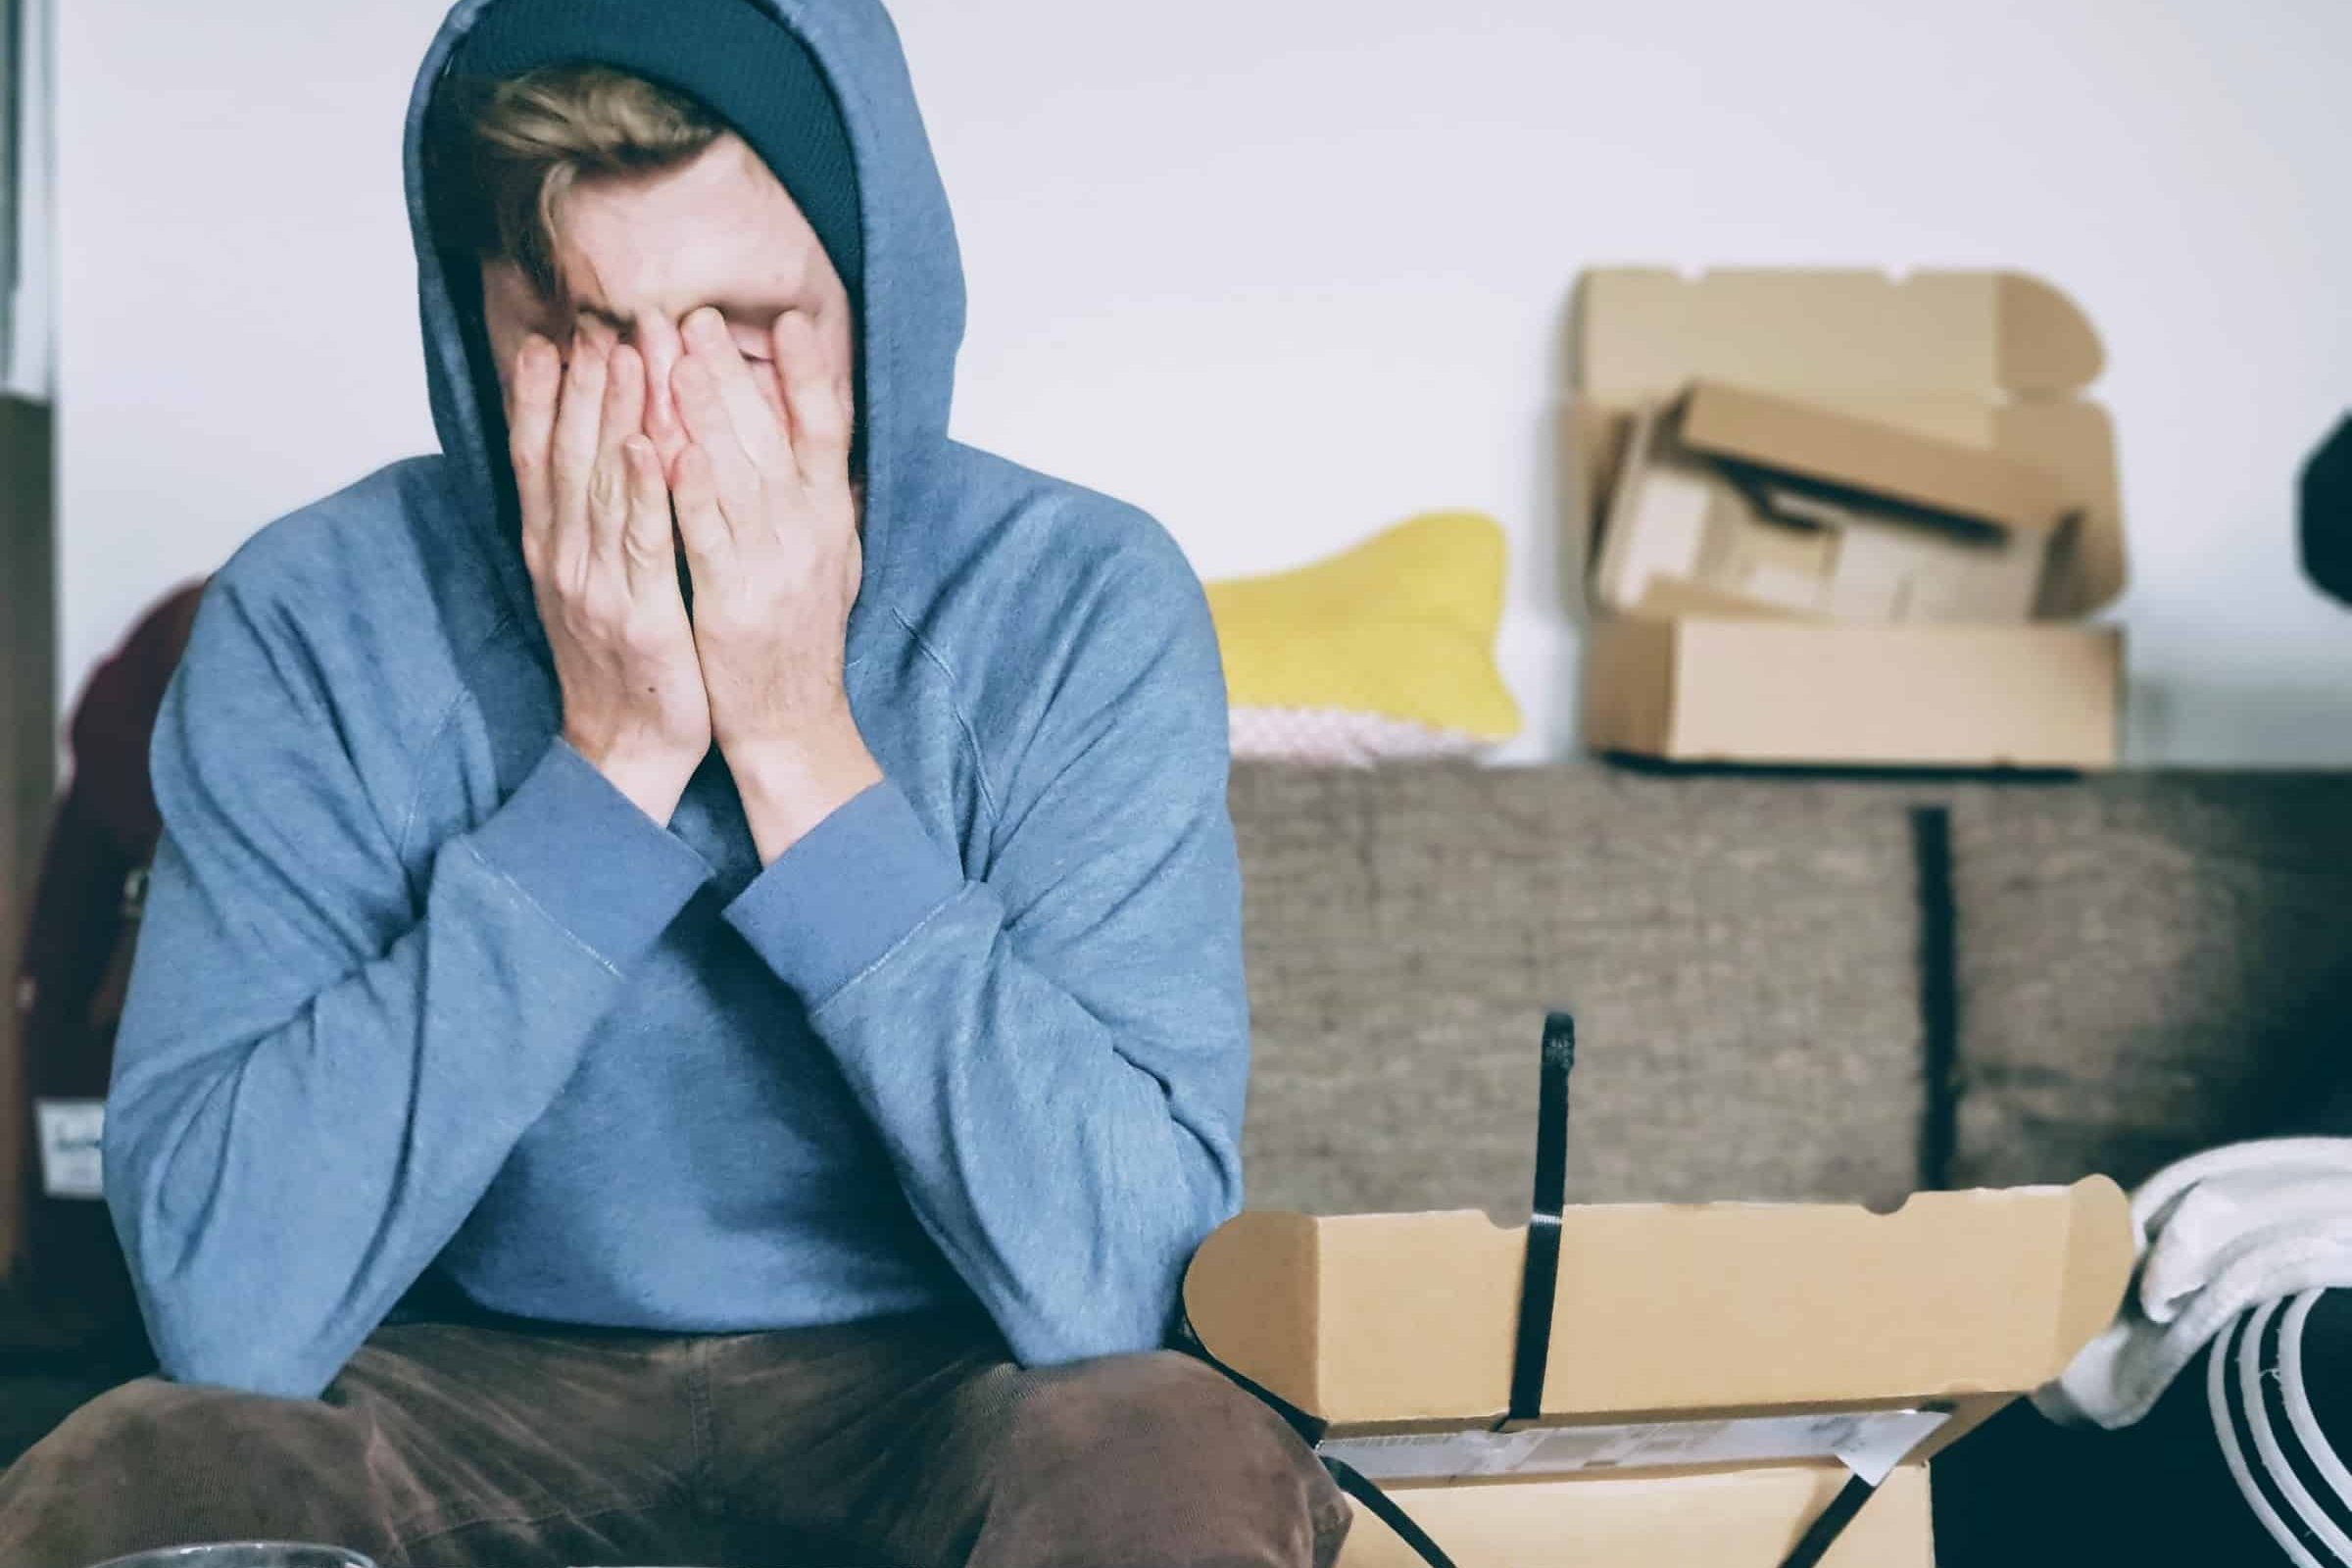 A stressed young white man with his hands on his face surrounded by moving boxes